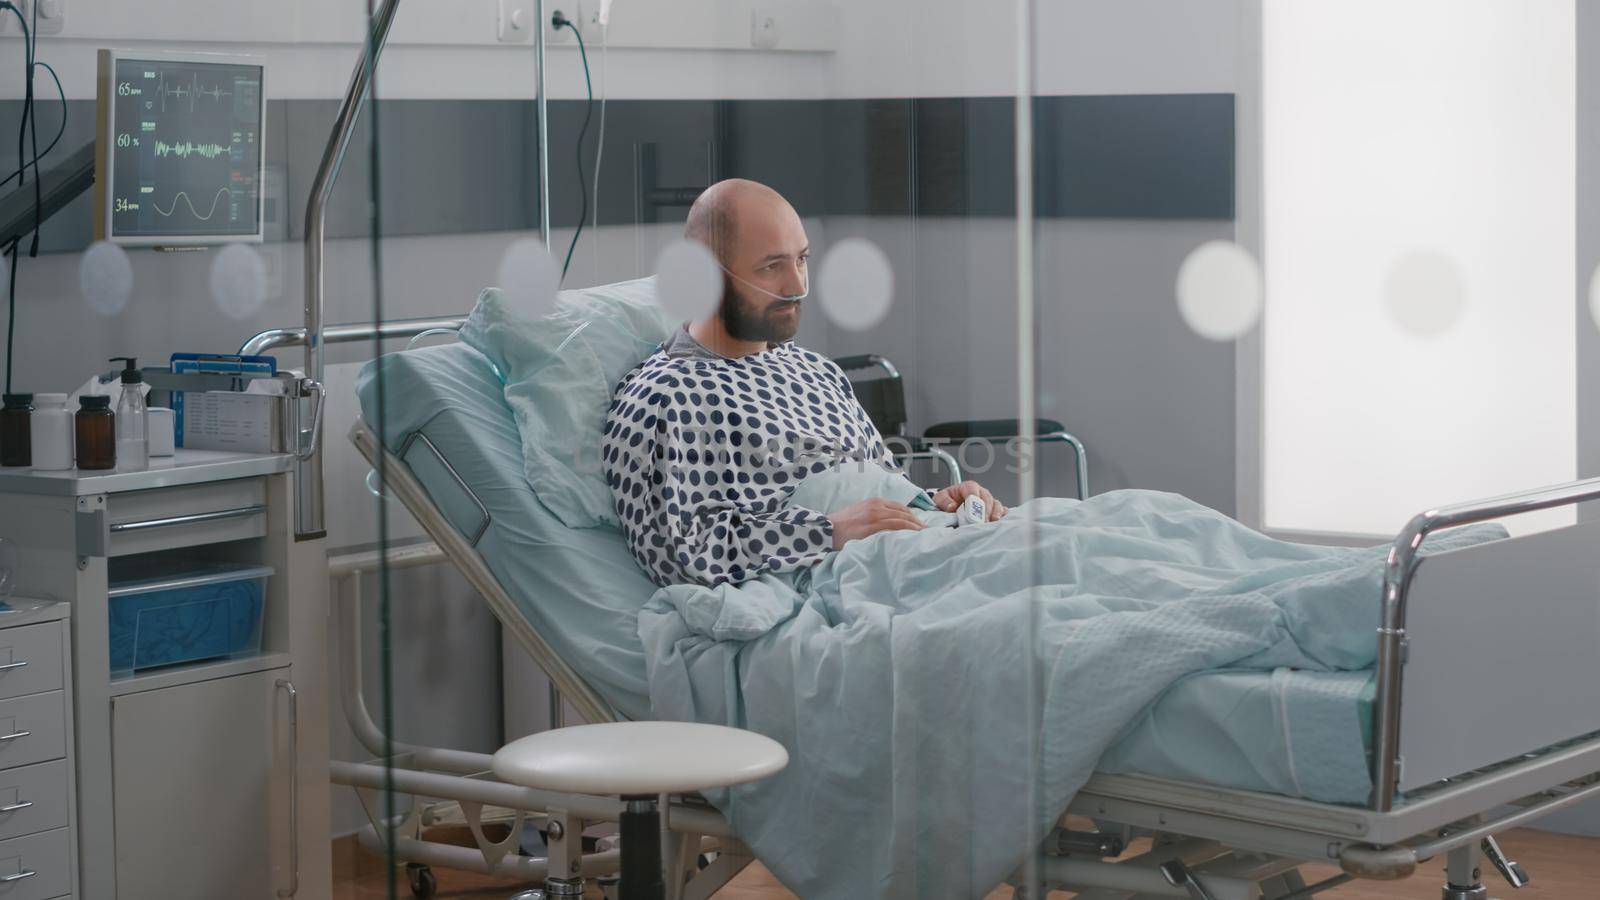 Stressed sick man sitting in bed waiting for respiratory treatment recovering after sickness surgery in hospital ward. Hospitalized patient looking into camera wearing nasal oxygen tube